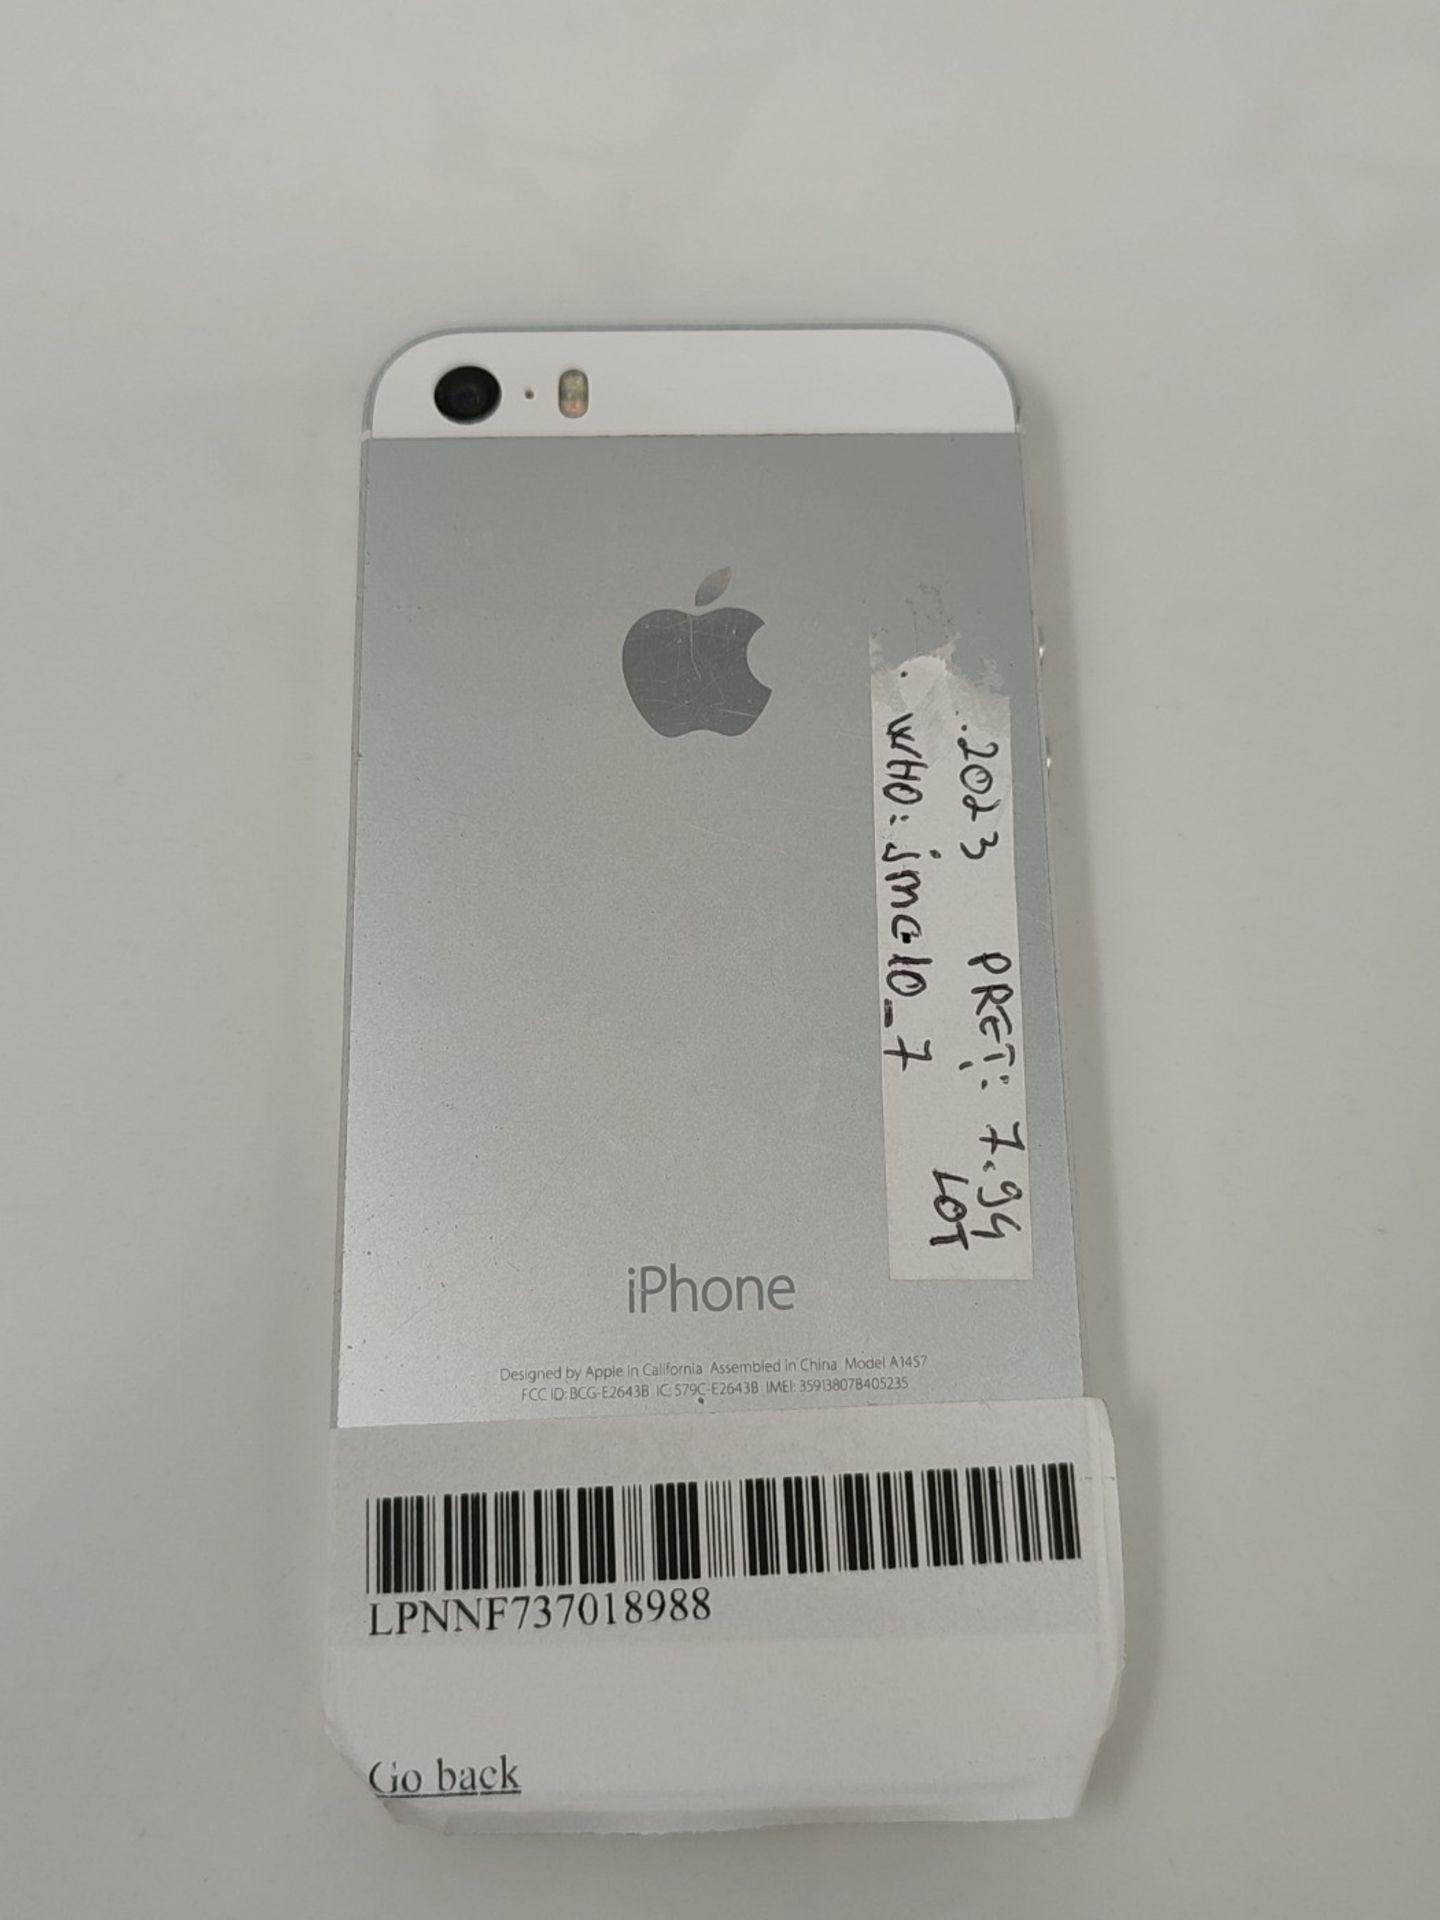 Apple iPhone 5s A1457 16GB White - Image 2 of 2